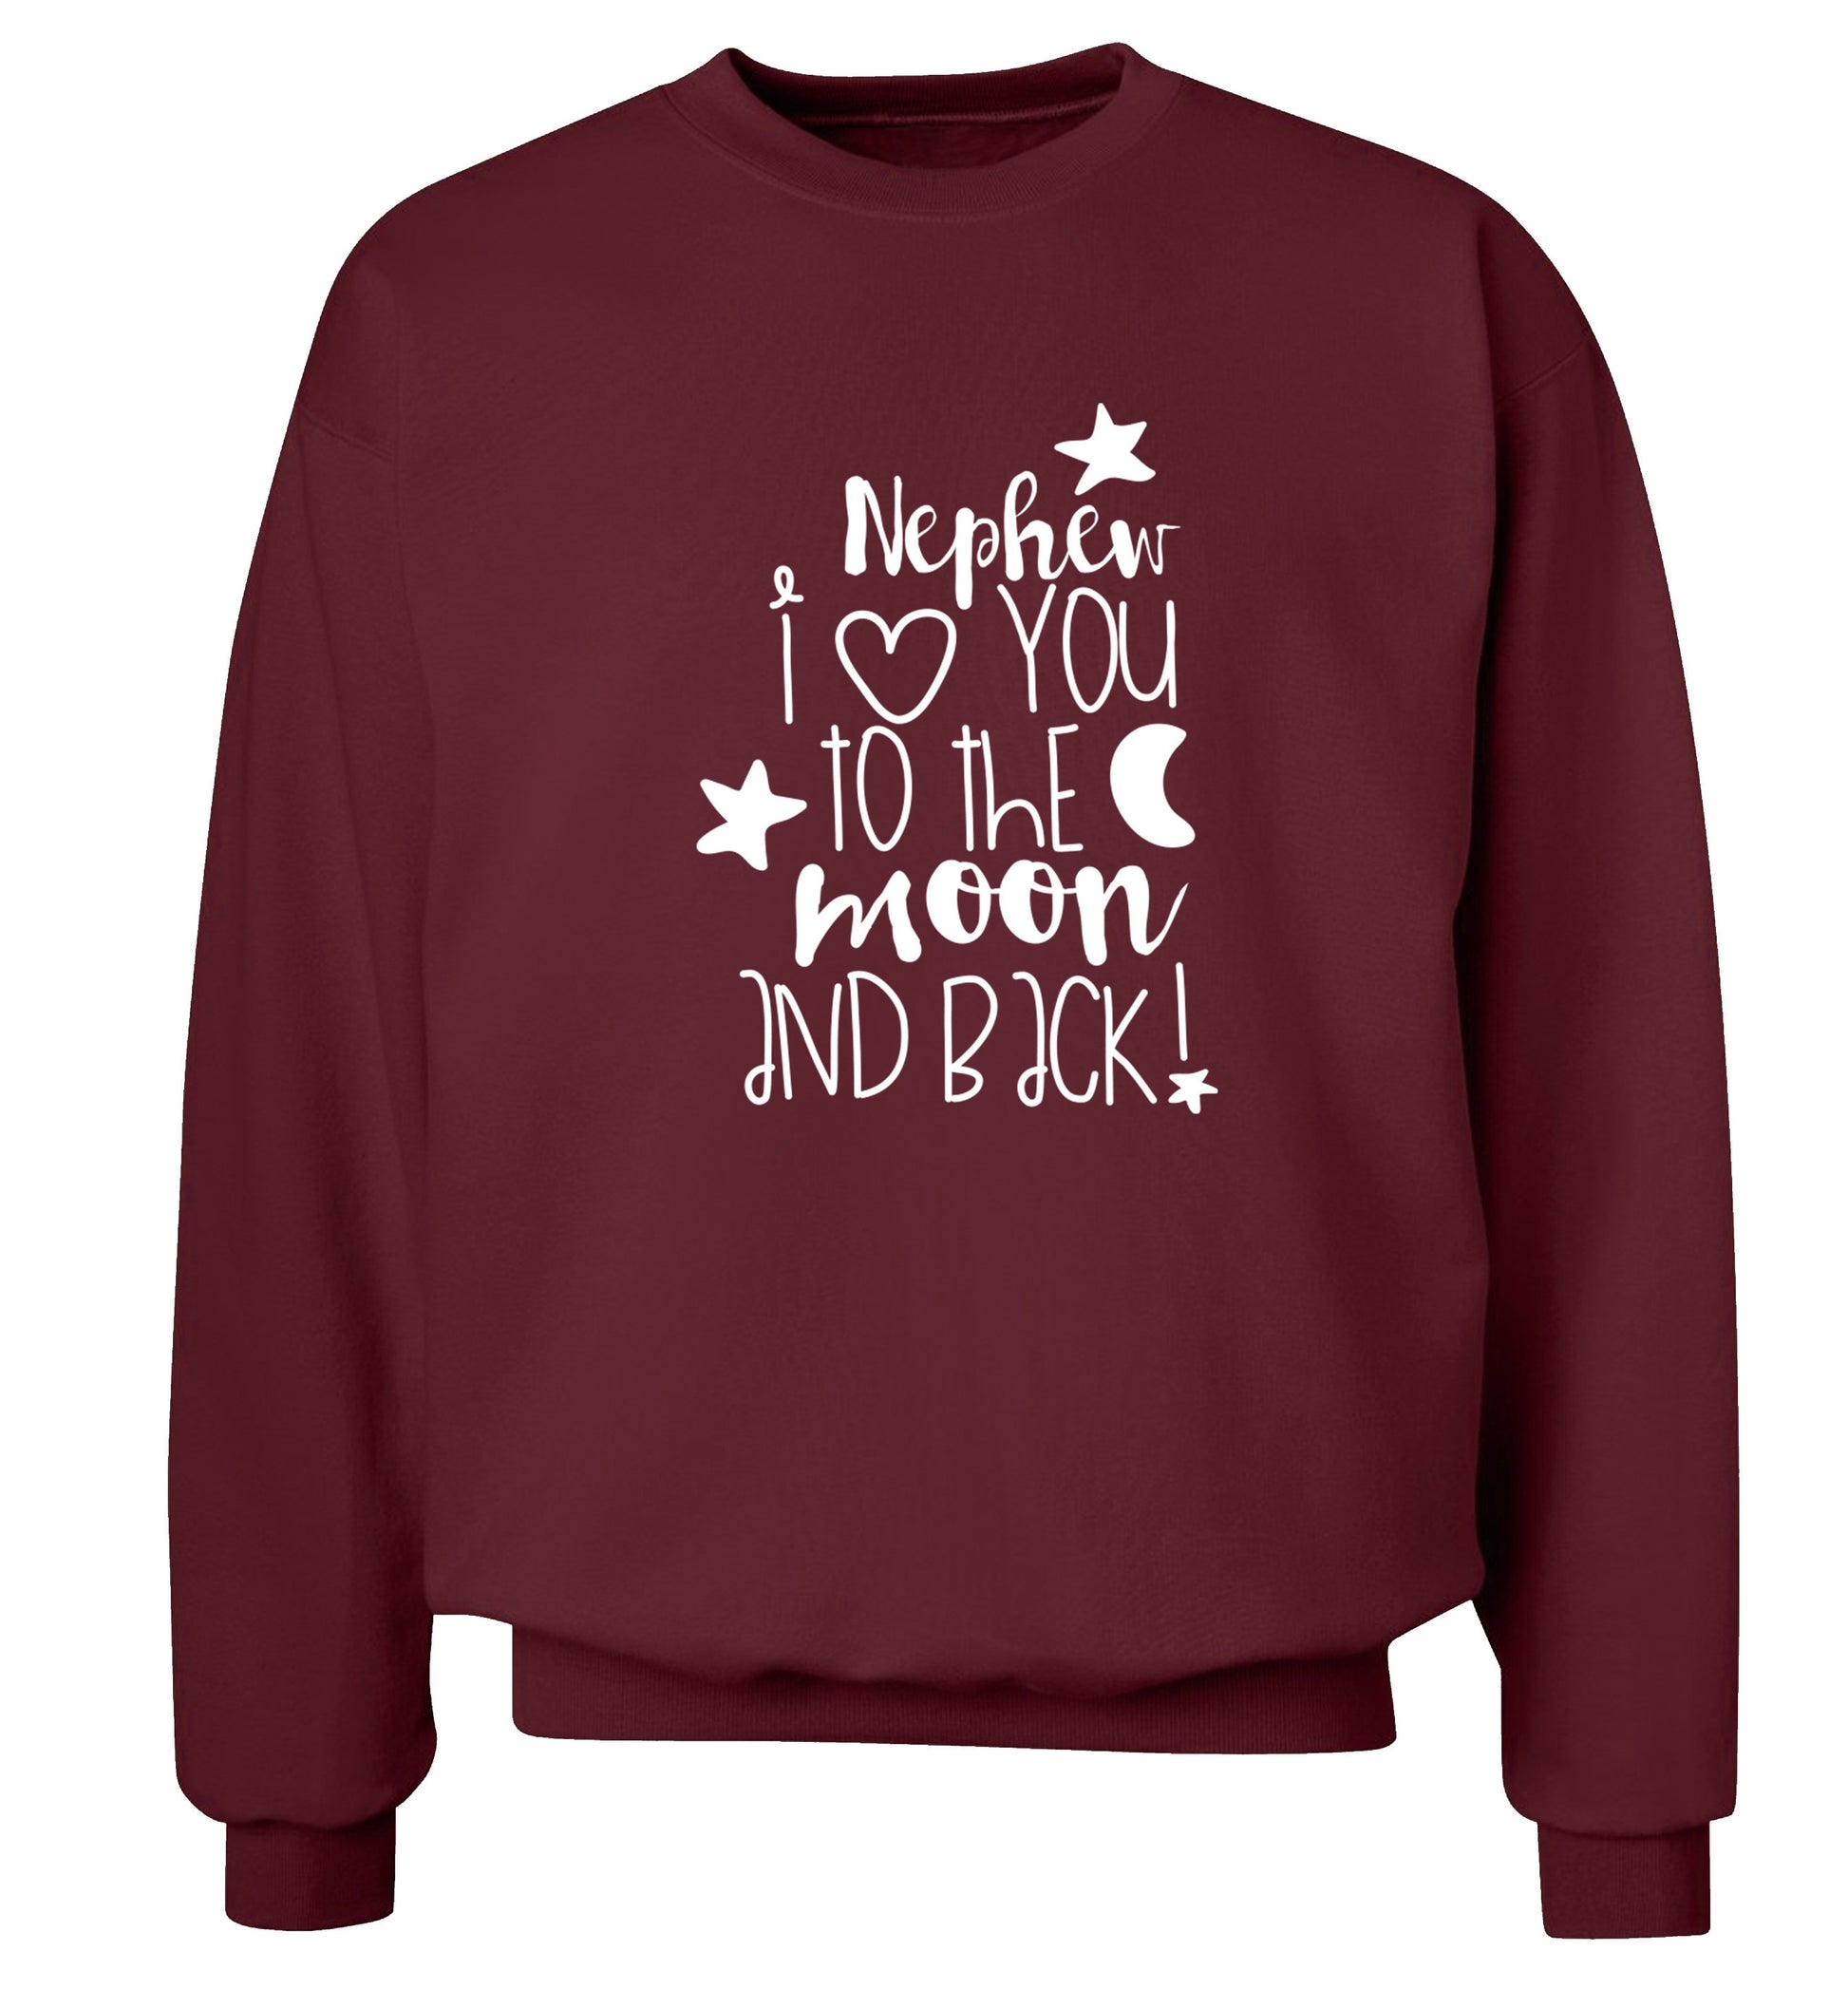 Nephew I love you to the moon and back Adult's unisex maroon  sweater 2XL